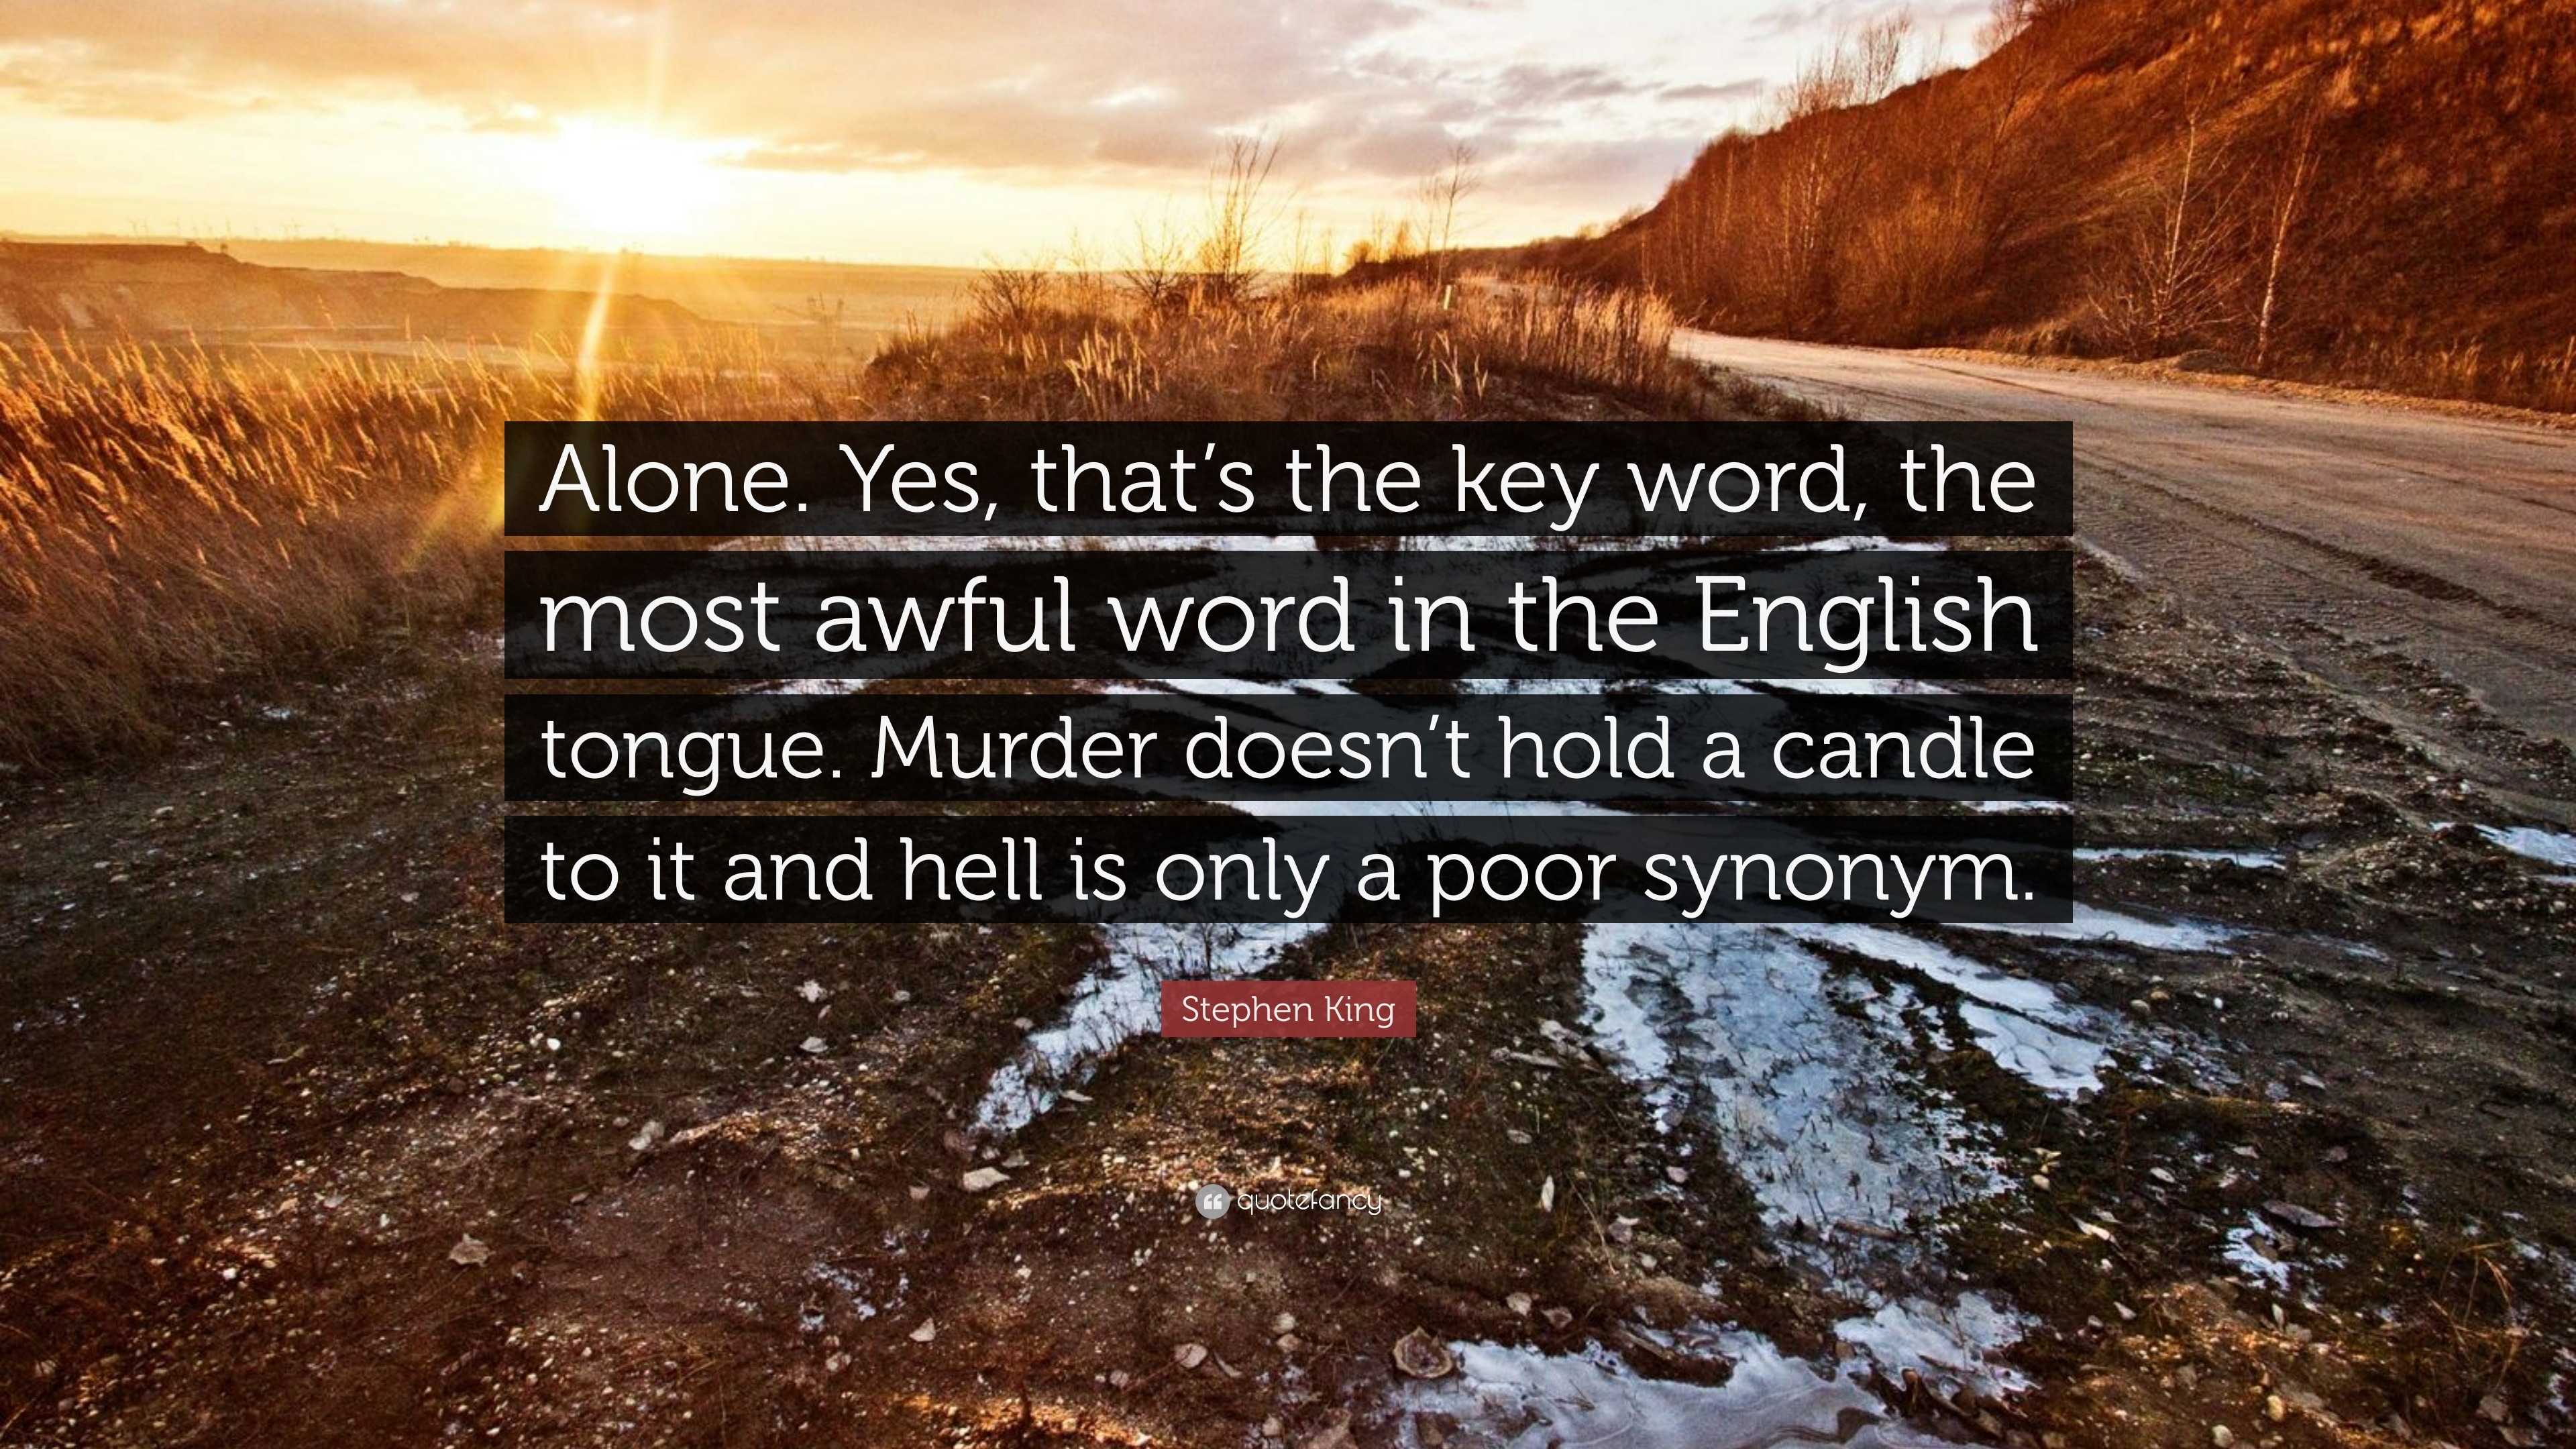 Stephen King Quote: “Alone. Yes, that's the key word, the most awful word  in the English tongue. Murder doesn't hold a candle to it and hell ”